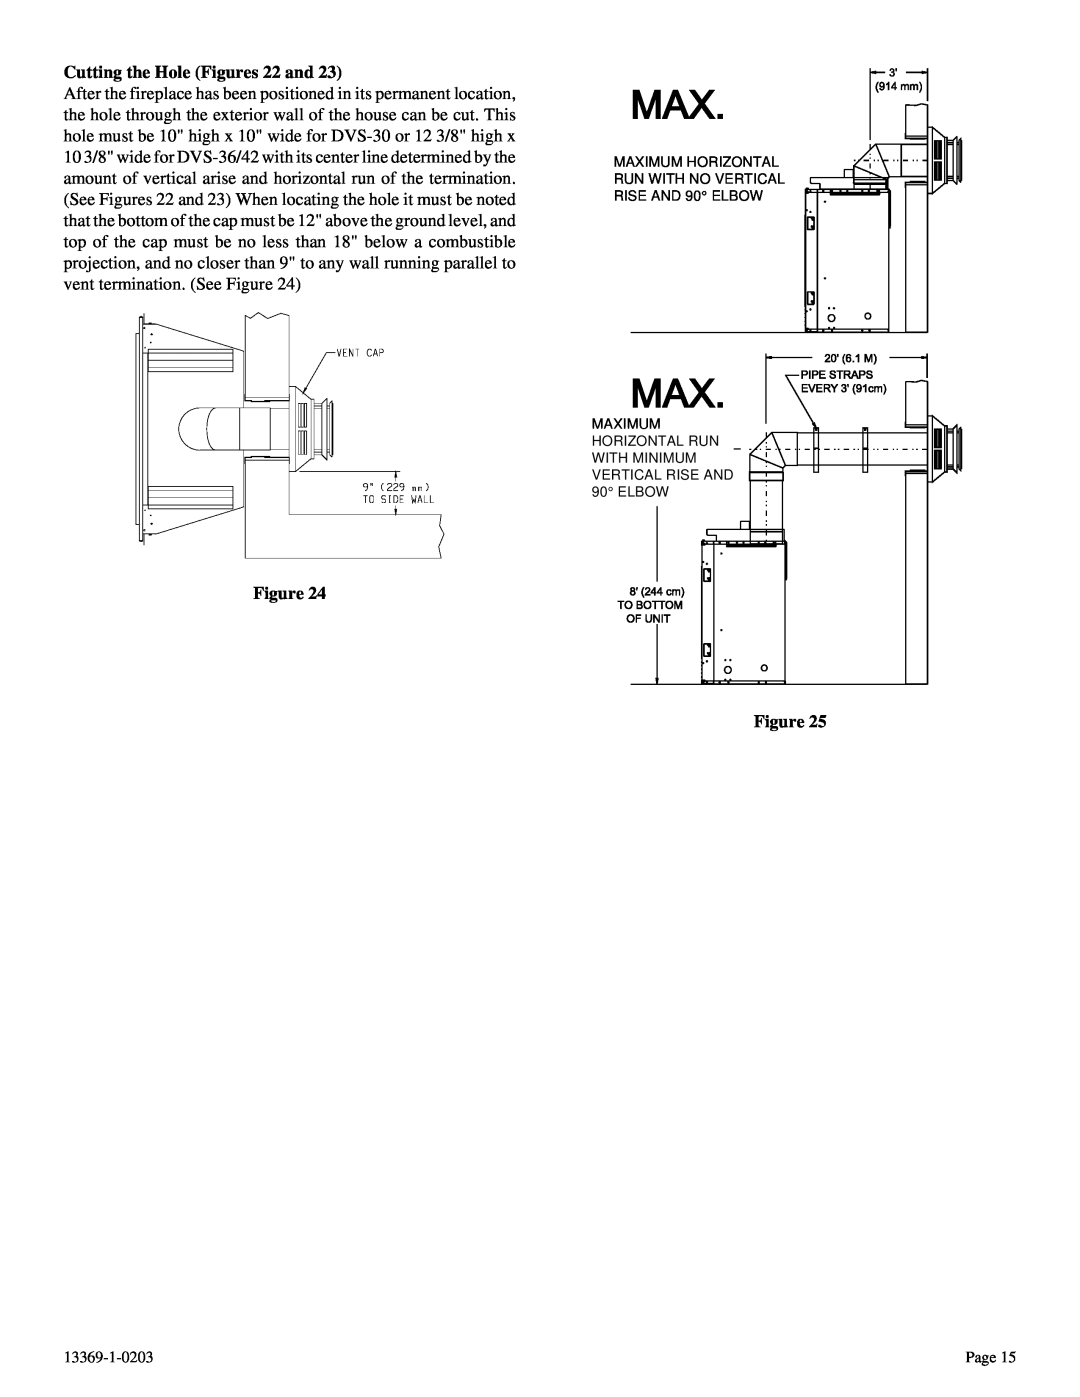 DVS 30-2 installation instructions Cutting the Hole Figures 22 and 